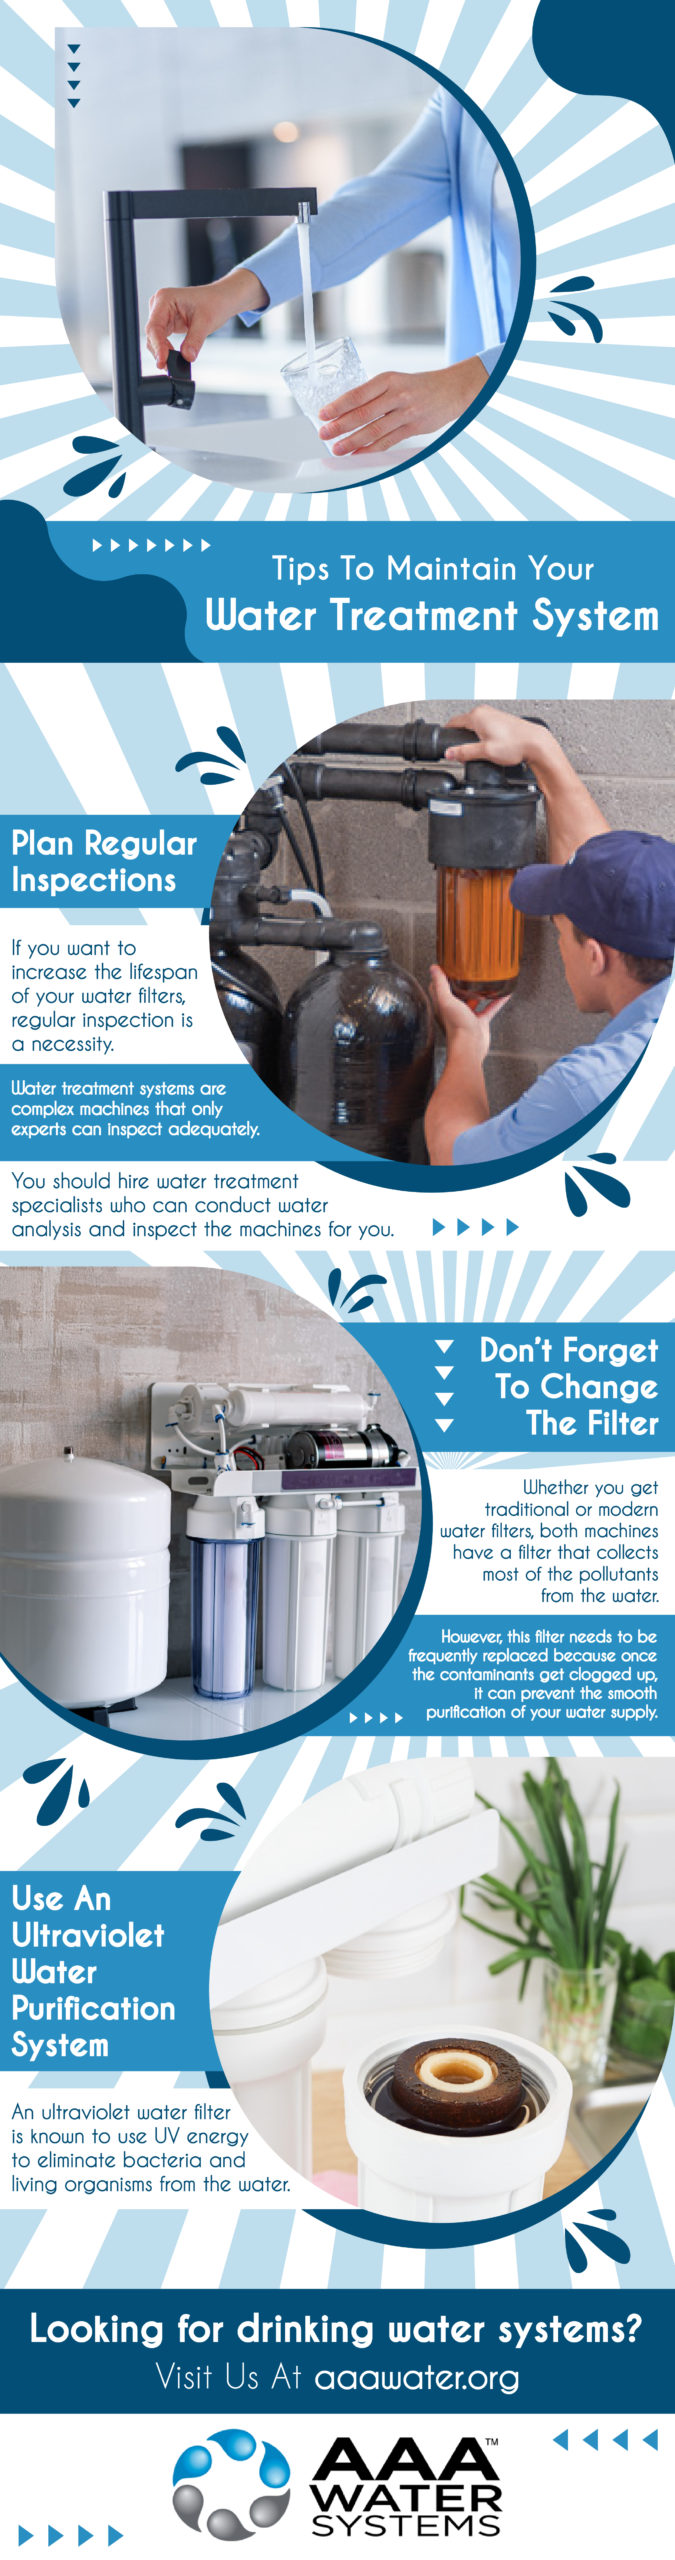 Tips to maintain your water treatment system - Infograph